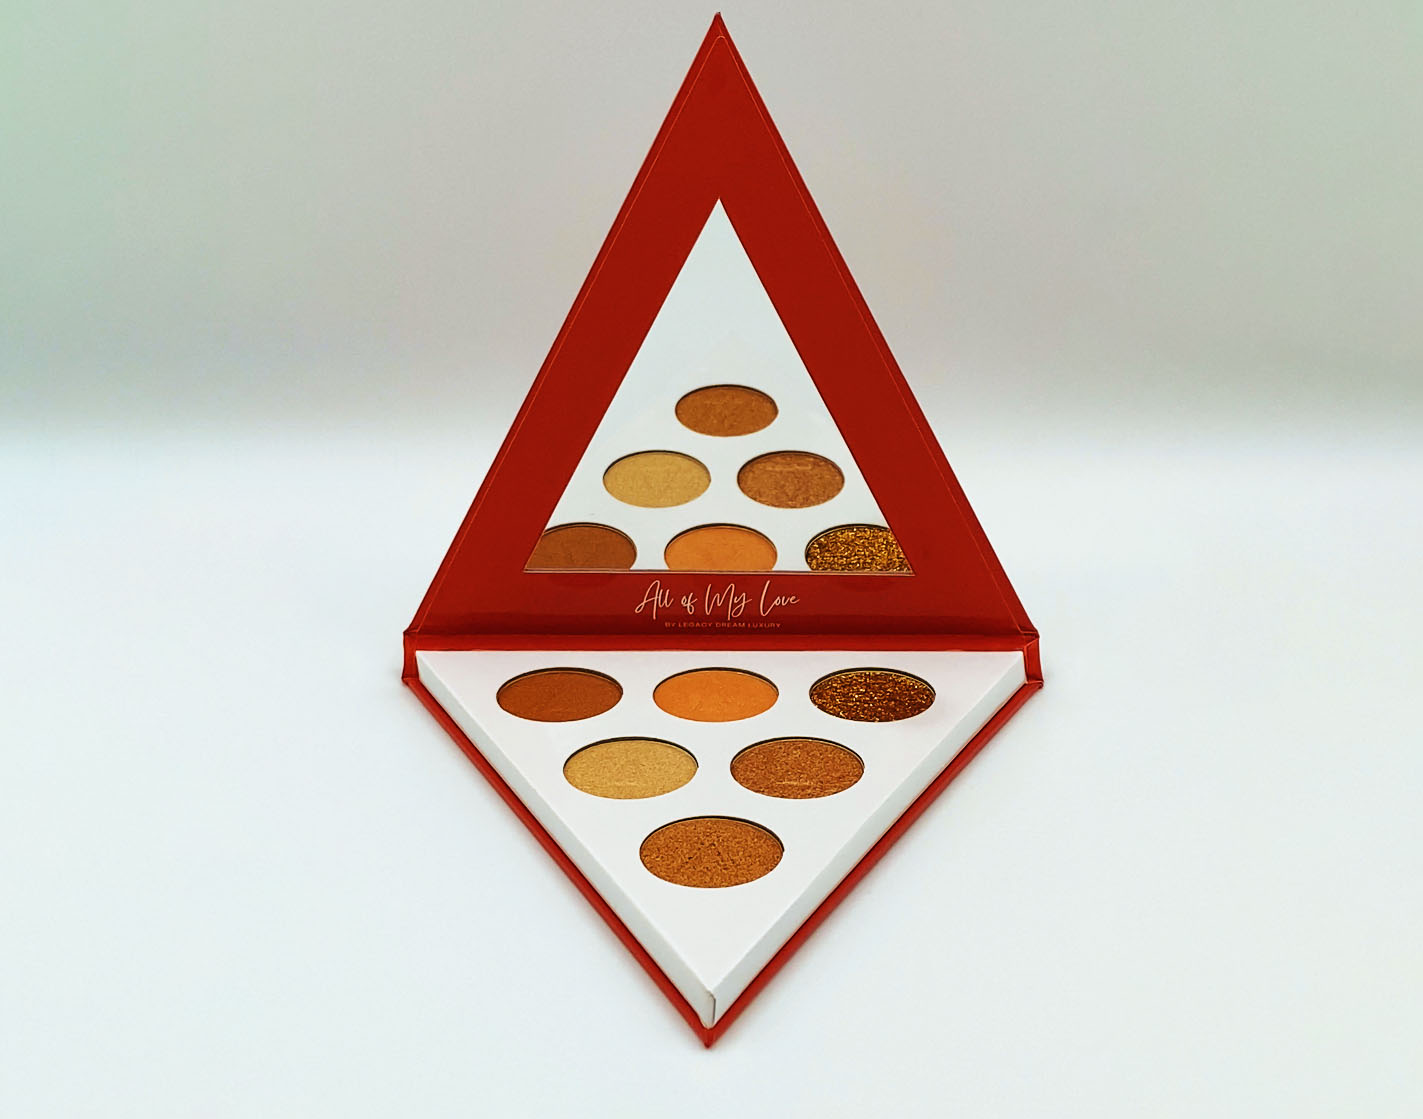 LIMITED EDITION - THE ULTIMATE DELTA SLAY KIT - BRONZE